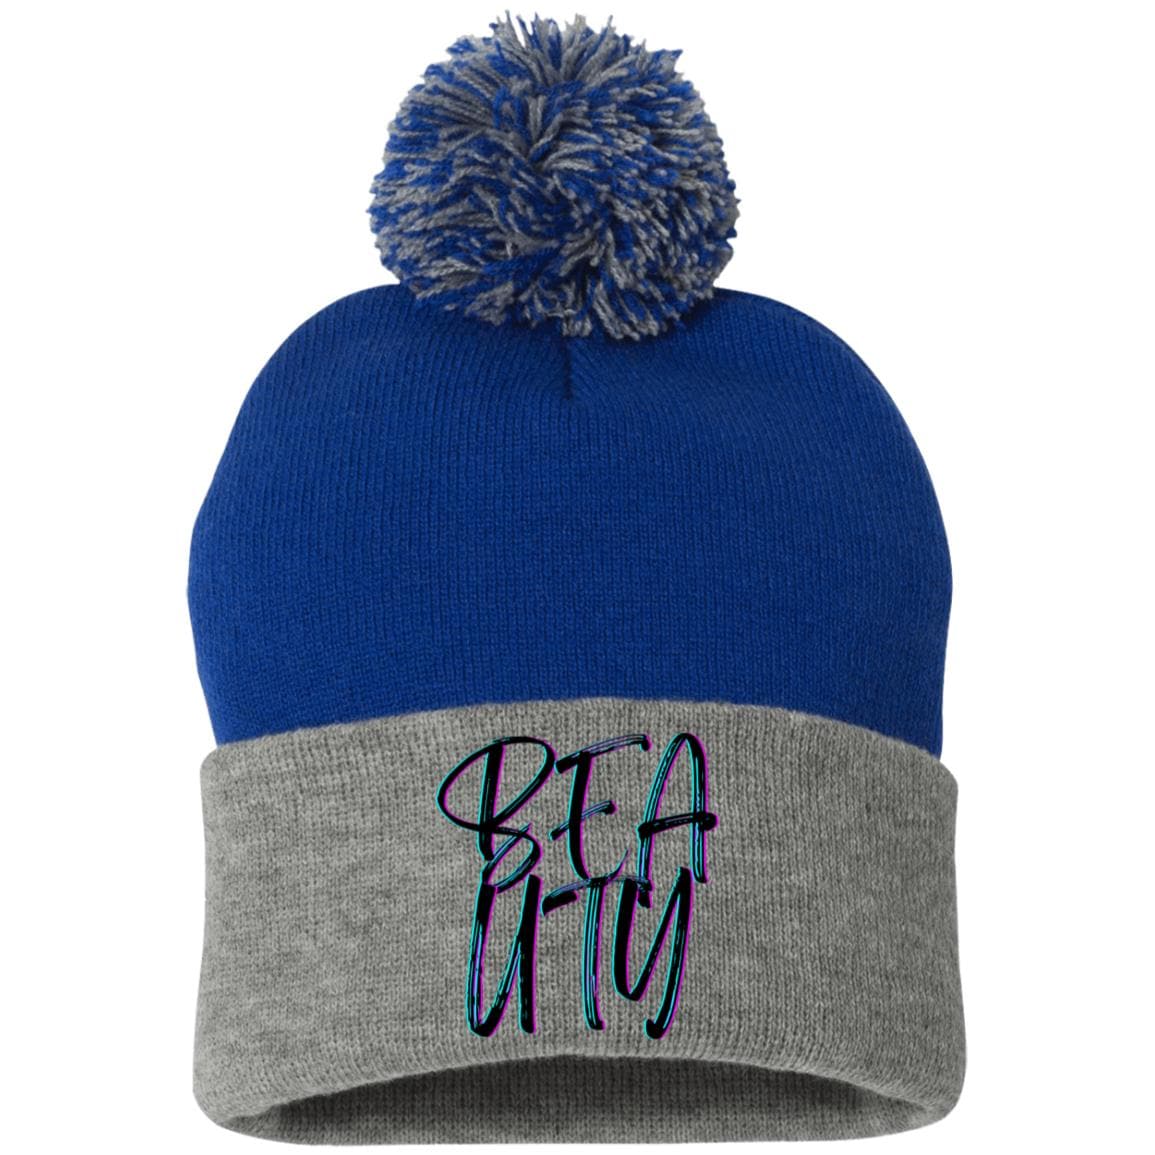 Royal/Heather Grey One Size - Beauty Embroidered Pom Pom Knit Cap - Hats at TFC&H Co.